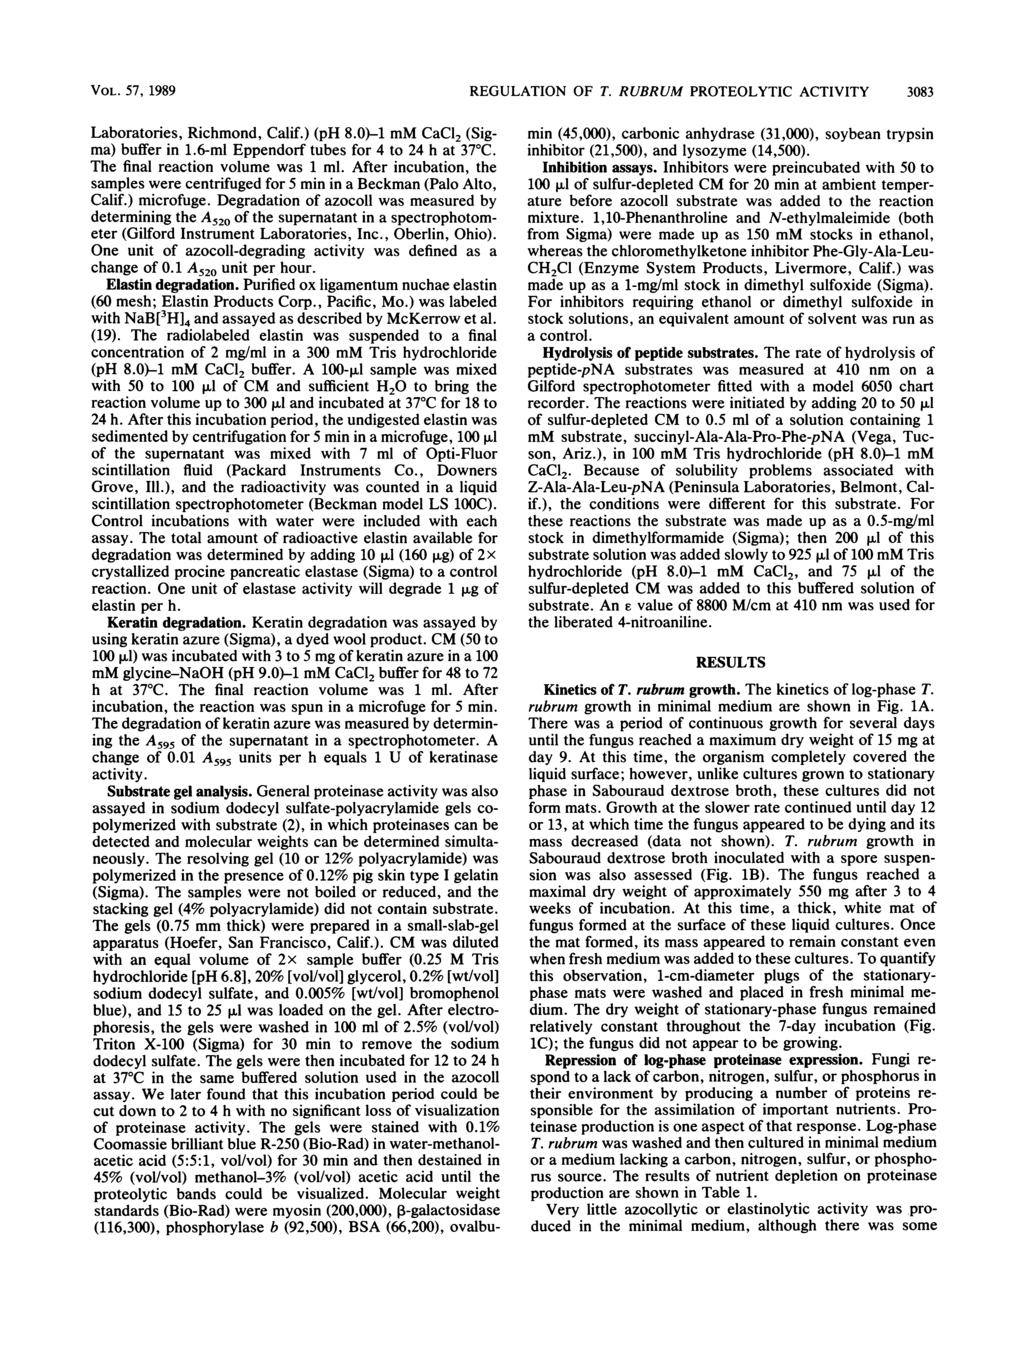 VOL. 57, 1989 REGULATION OF T. RUBRUM PROTEOLYTIC ACTIVITY 3083 Laboratories, Richmond, Calif.) (ph 8.0)-i mm CaC12 (Sigma) buffer in 1.6-ml Eppendorf tubes for 4 to 24 h at 37 C.